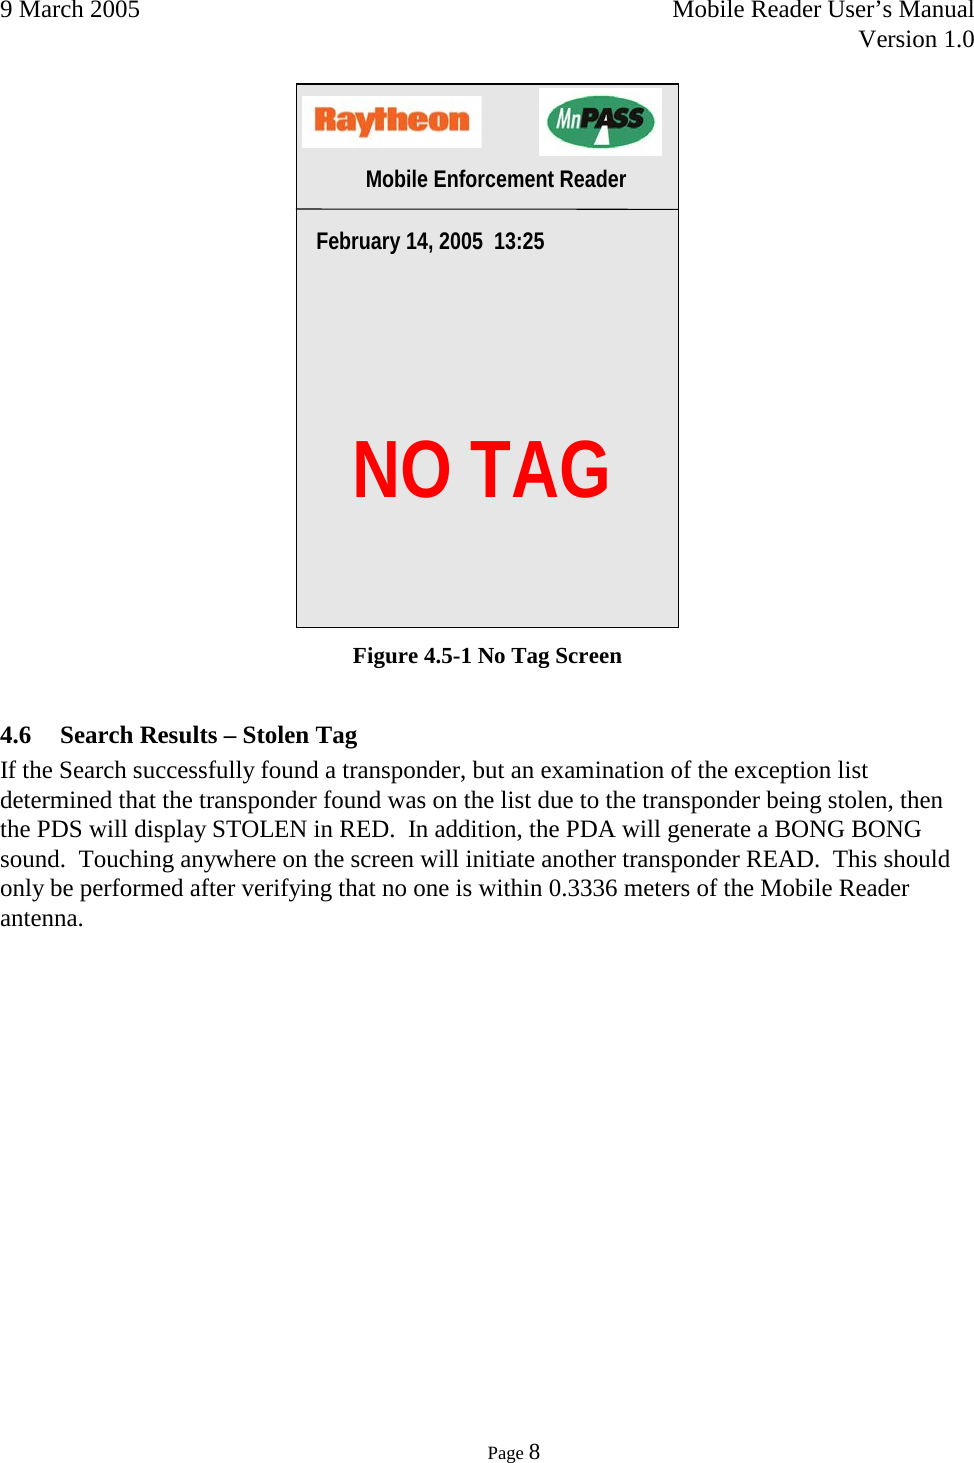 9 March 2005    Mobile Reader User’s Manual   Version 1.0      Page 8   Figure 4.5-1 No Tag Screen 4.6 Search Results – Stolen Tag If the Search successfully found a transponder, but an examination of the exception list determined that the transponder found was on the list due to the transponder being stolen, then the PDS will display STOLEN in RED.  In addition, the PDA will generate a BONG BONG sound.  Touching anywhere on the screen will initiate another transponder READ.  This should only be performed after verifying that no one is within 0.3336 meters of the Mobile Reader antenna.      NO TAG February 14, 2005  13:25 Mobile Enforcement Reader 